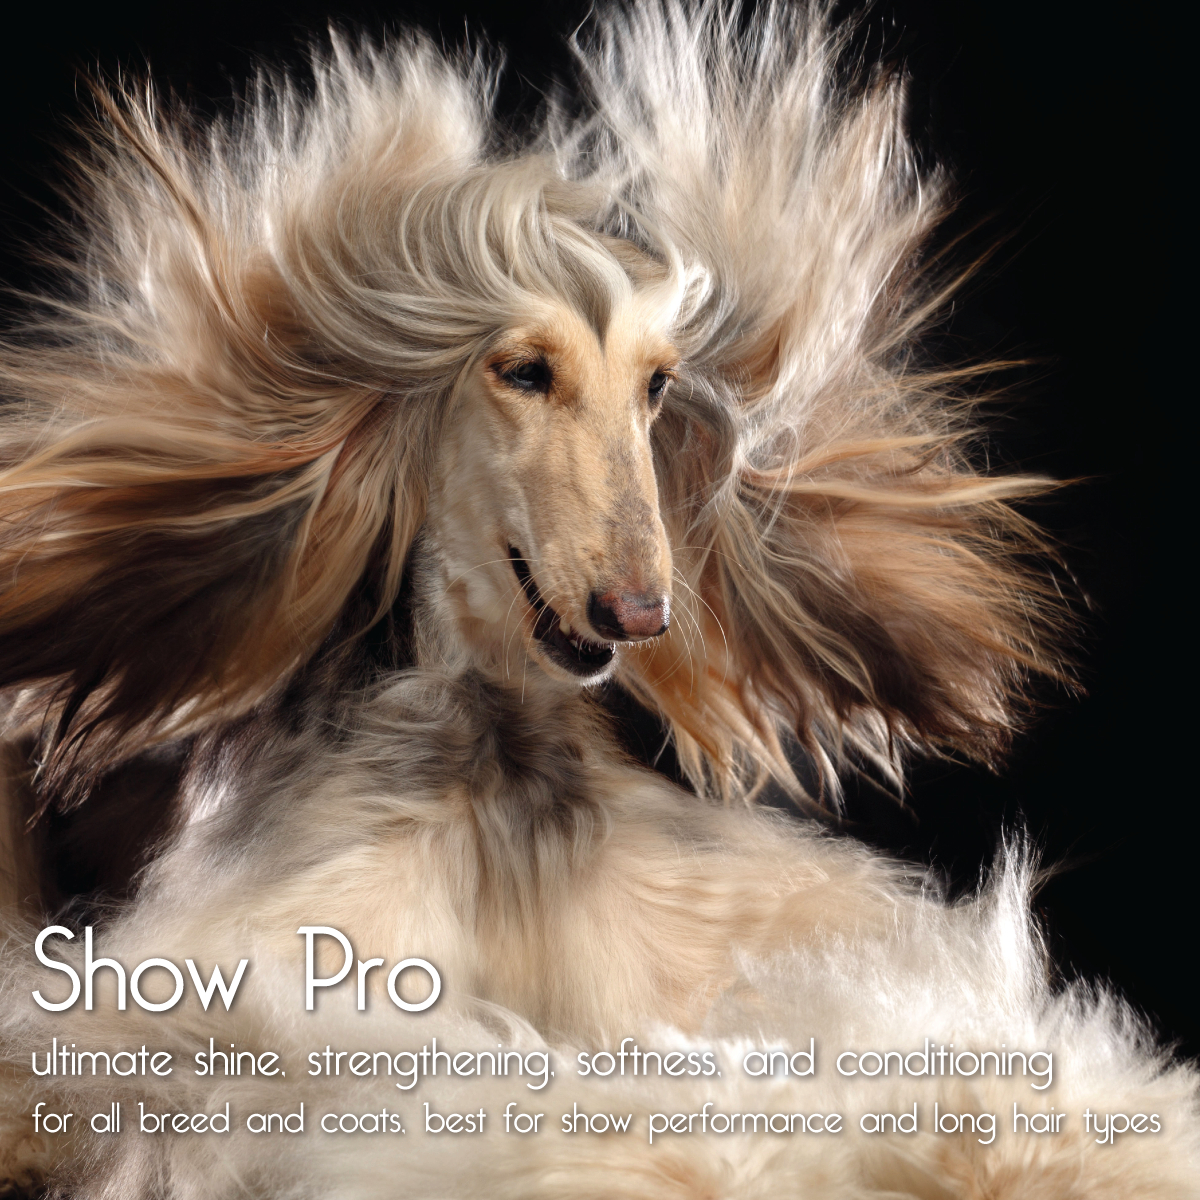 Show Pro+ Products